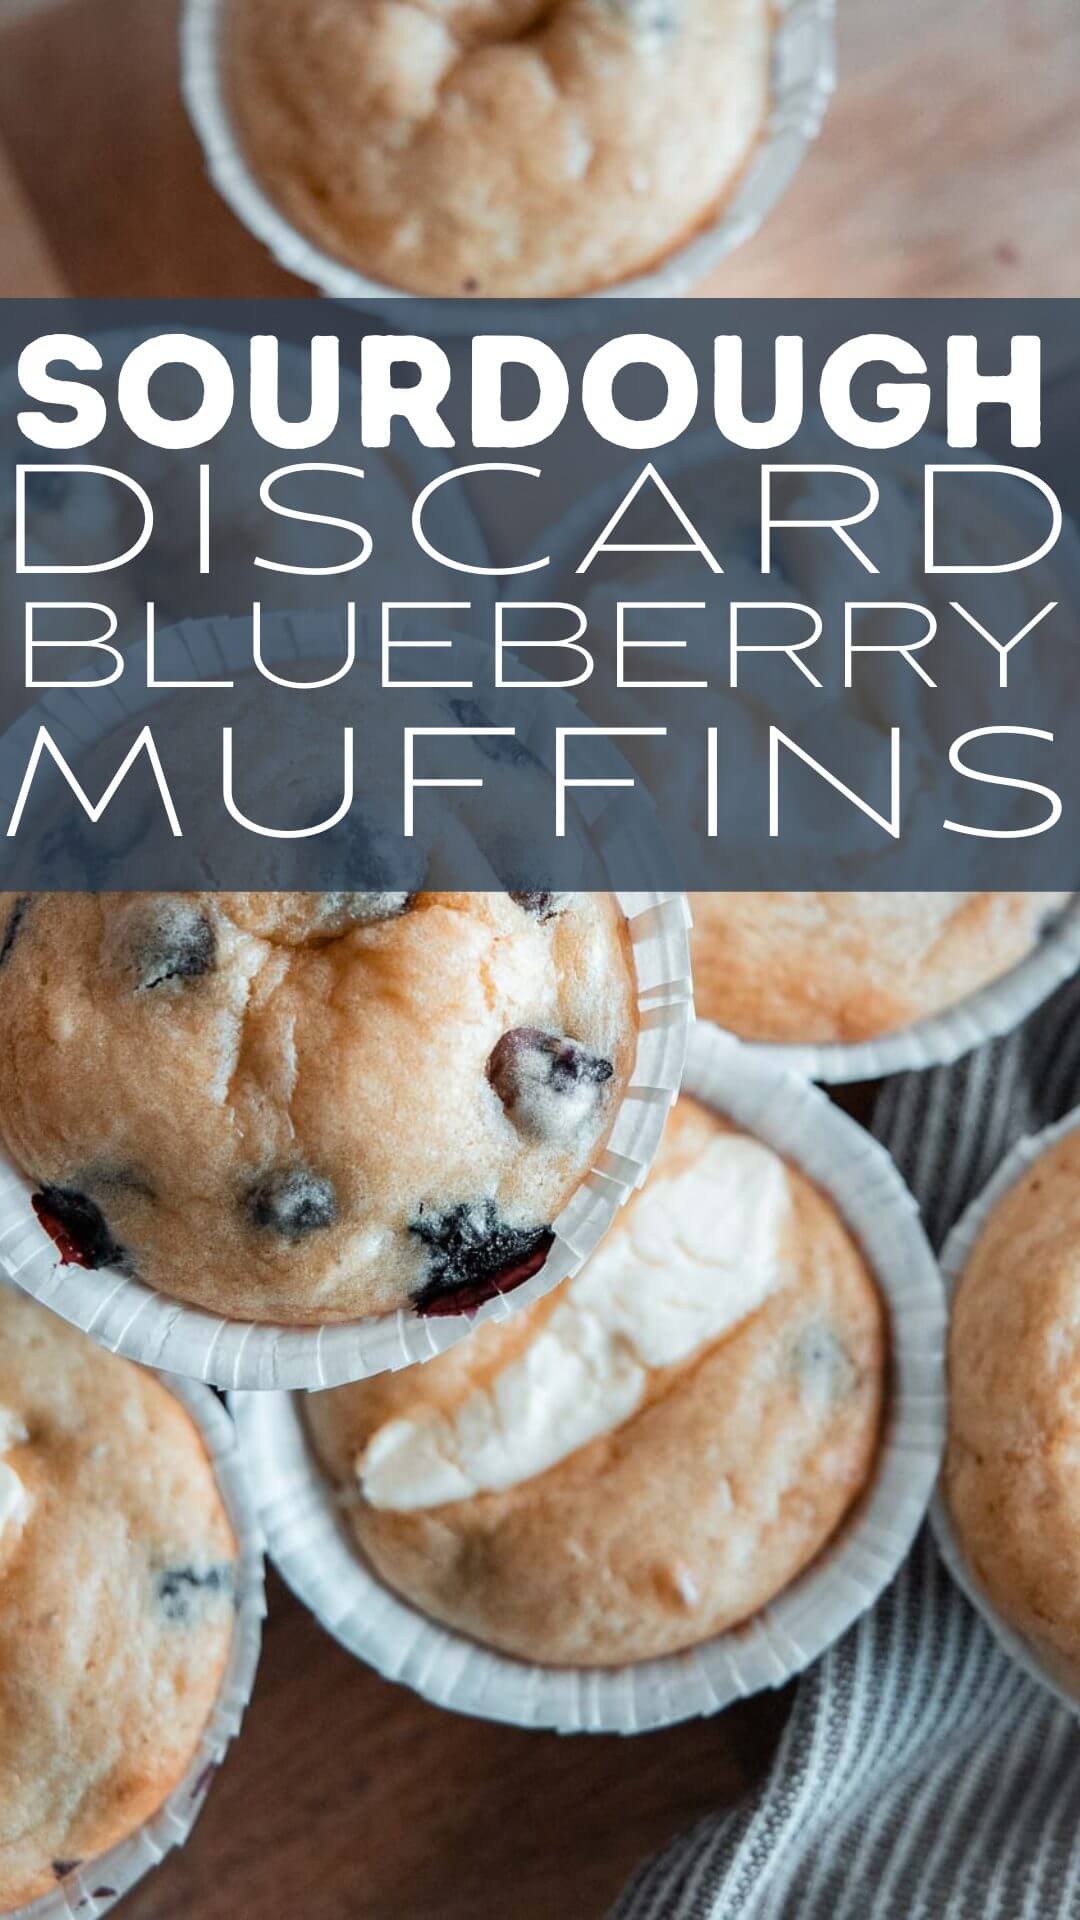 Make these amazing blueberry sourdough discard muffins with that extra sourdough  discard! These are soft, flavorful and the perfect treat.